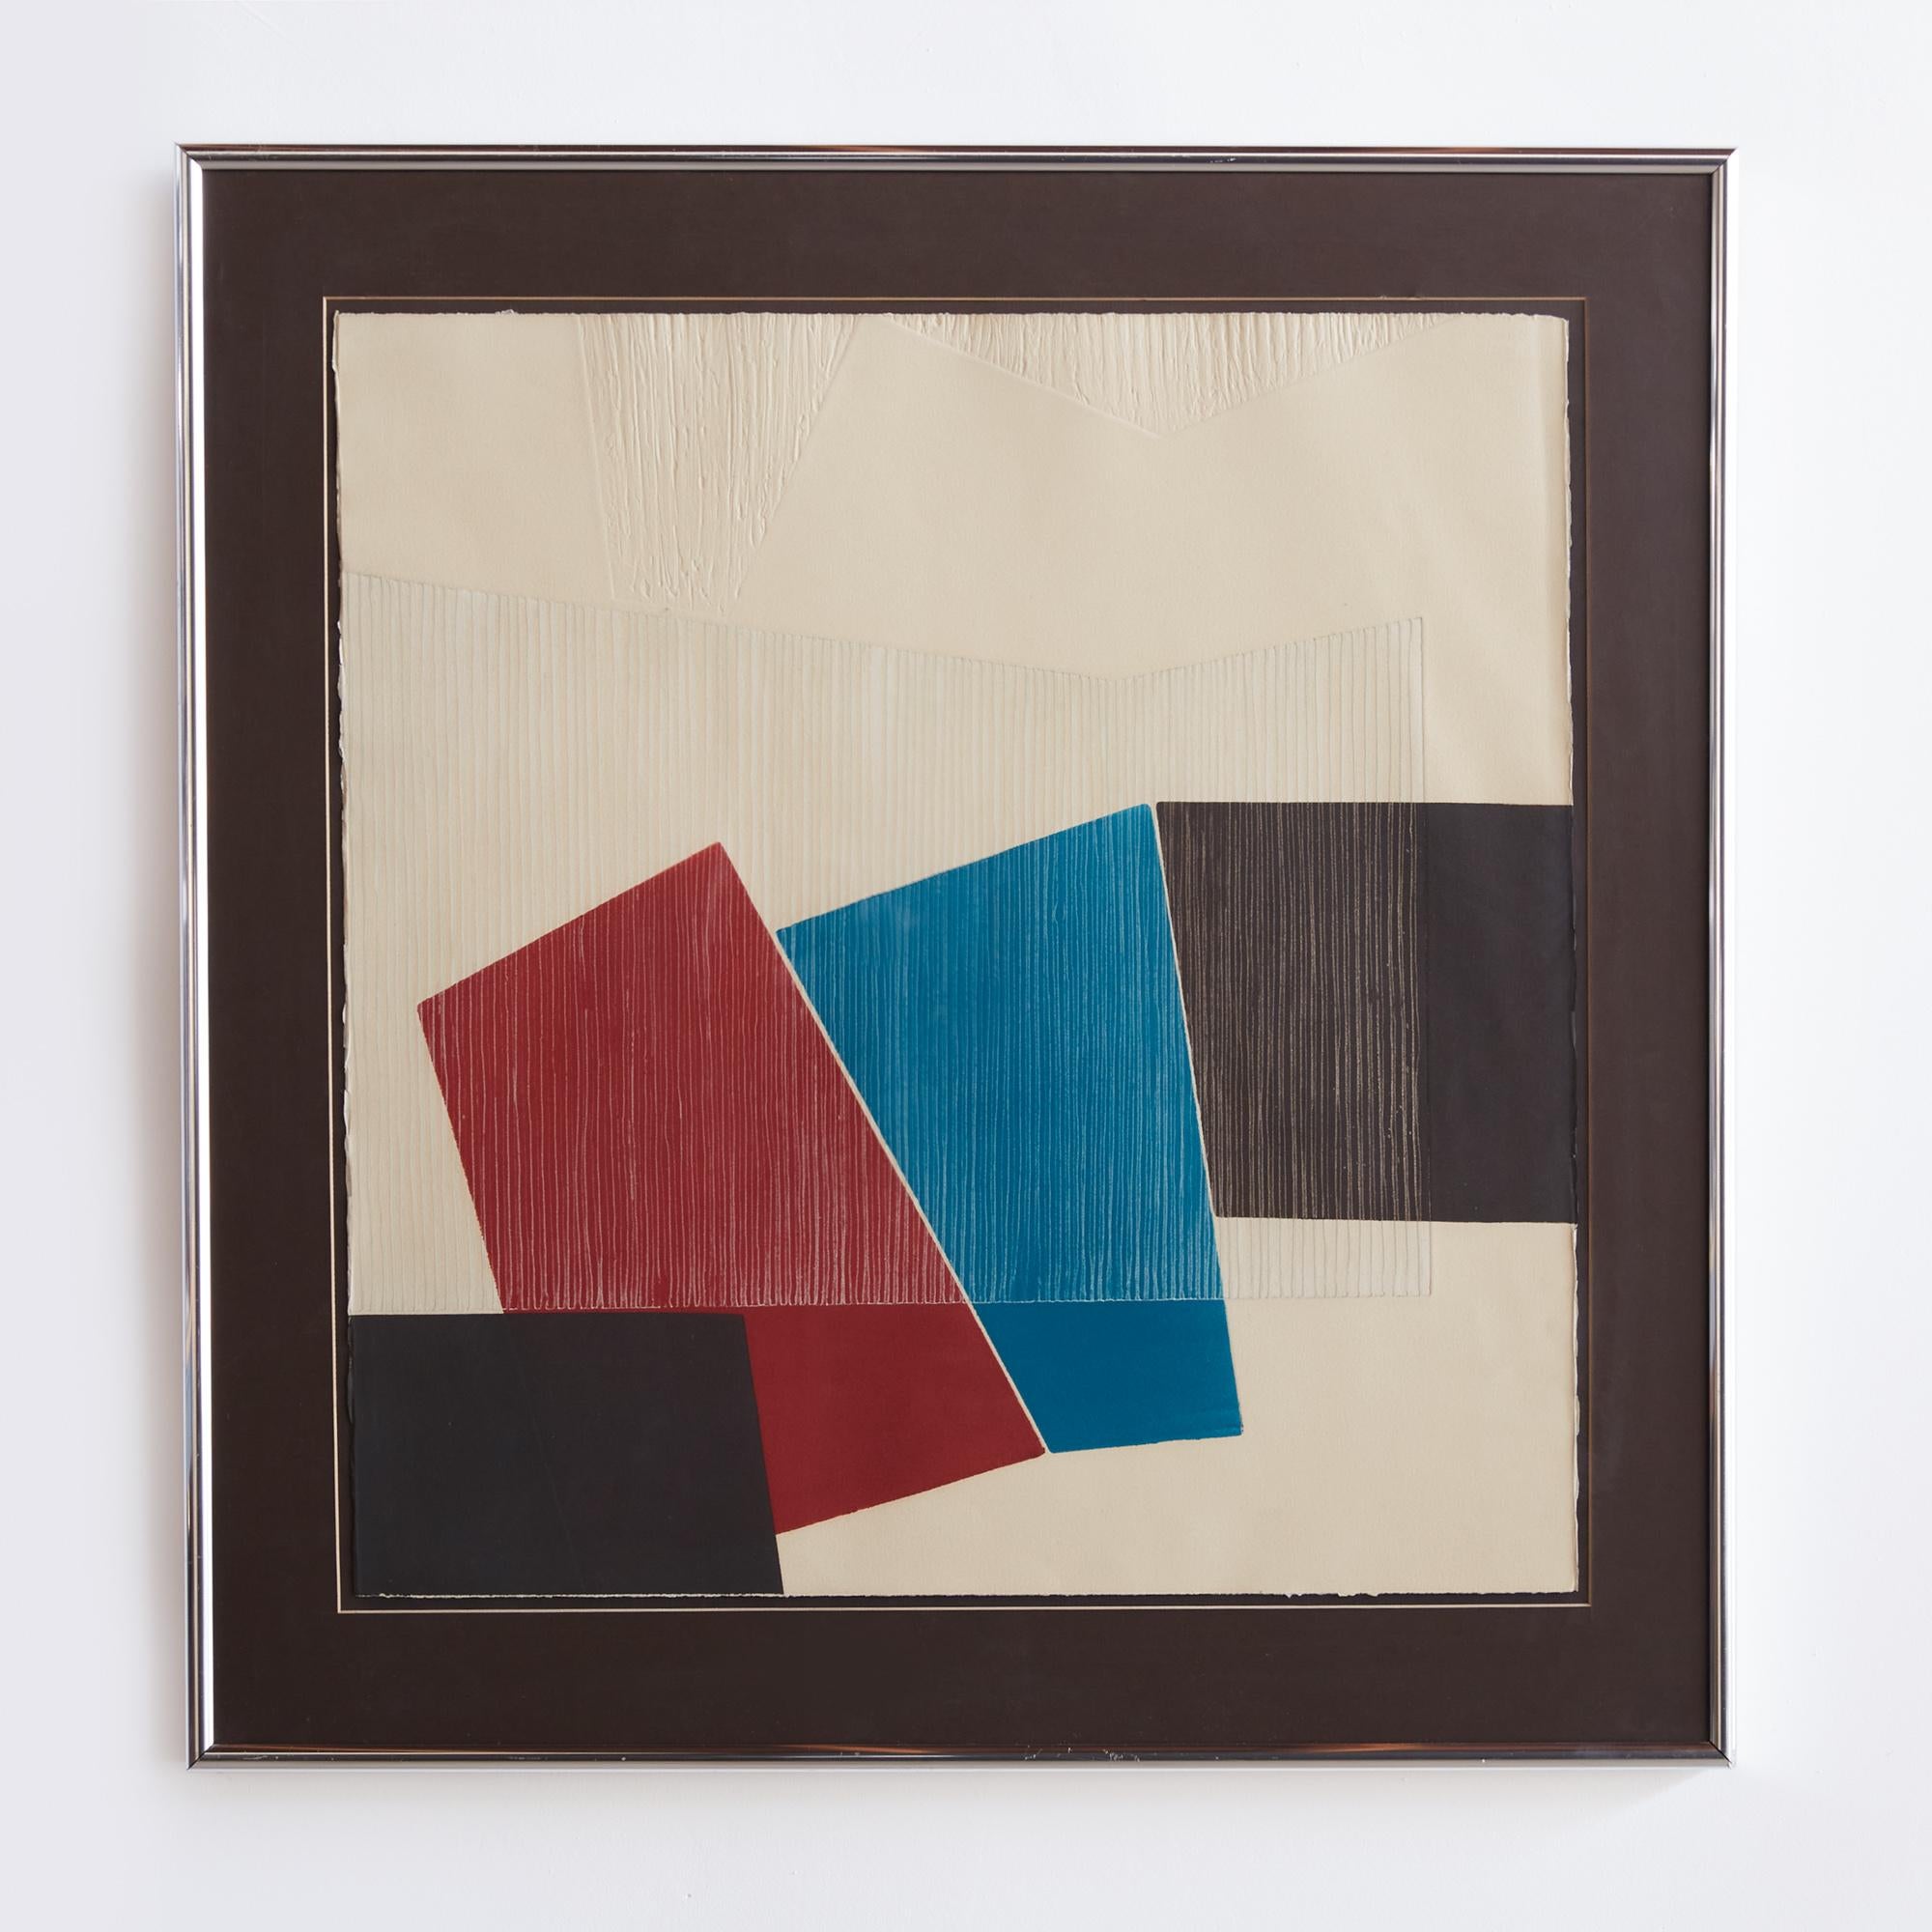 Mid-century screen print formed of blocks of garnet, sky blue, and carob. The blocks of colors build onto each other against a warm, ivory background. A lined coat on top of the base colors adds depth and texture to the composition. A complimentary